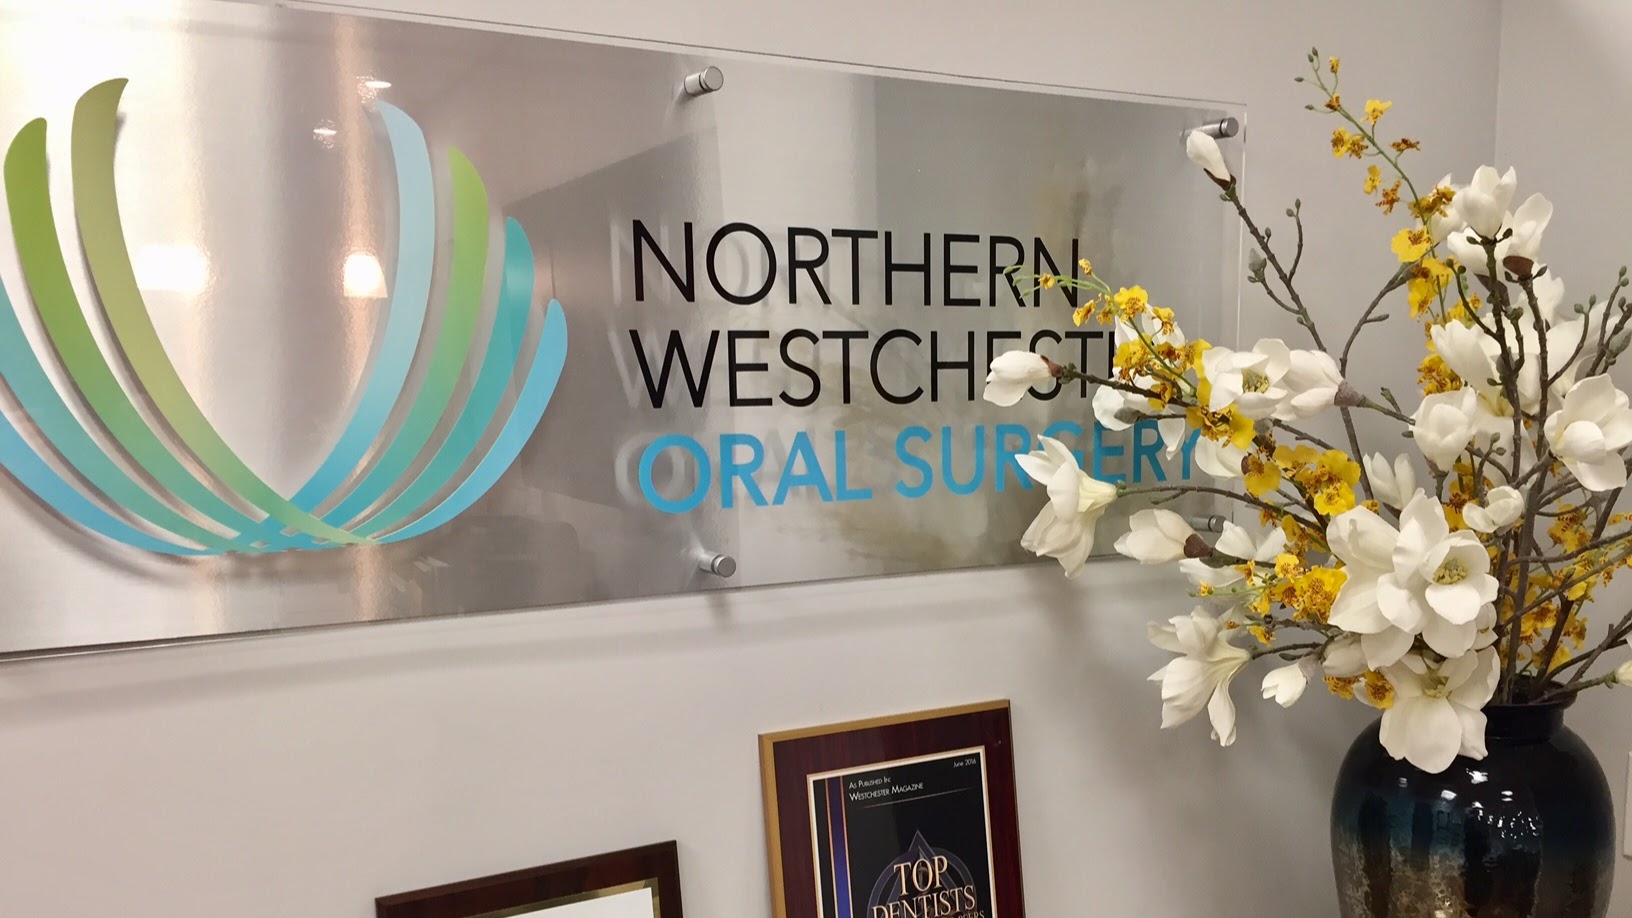 Northern Westchester Oral Surgery